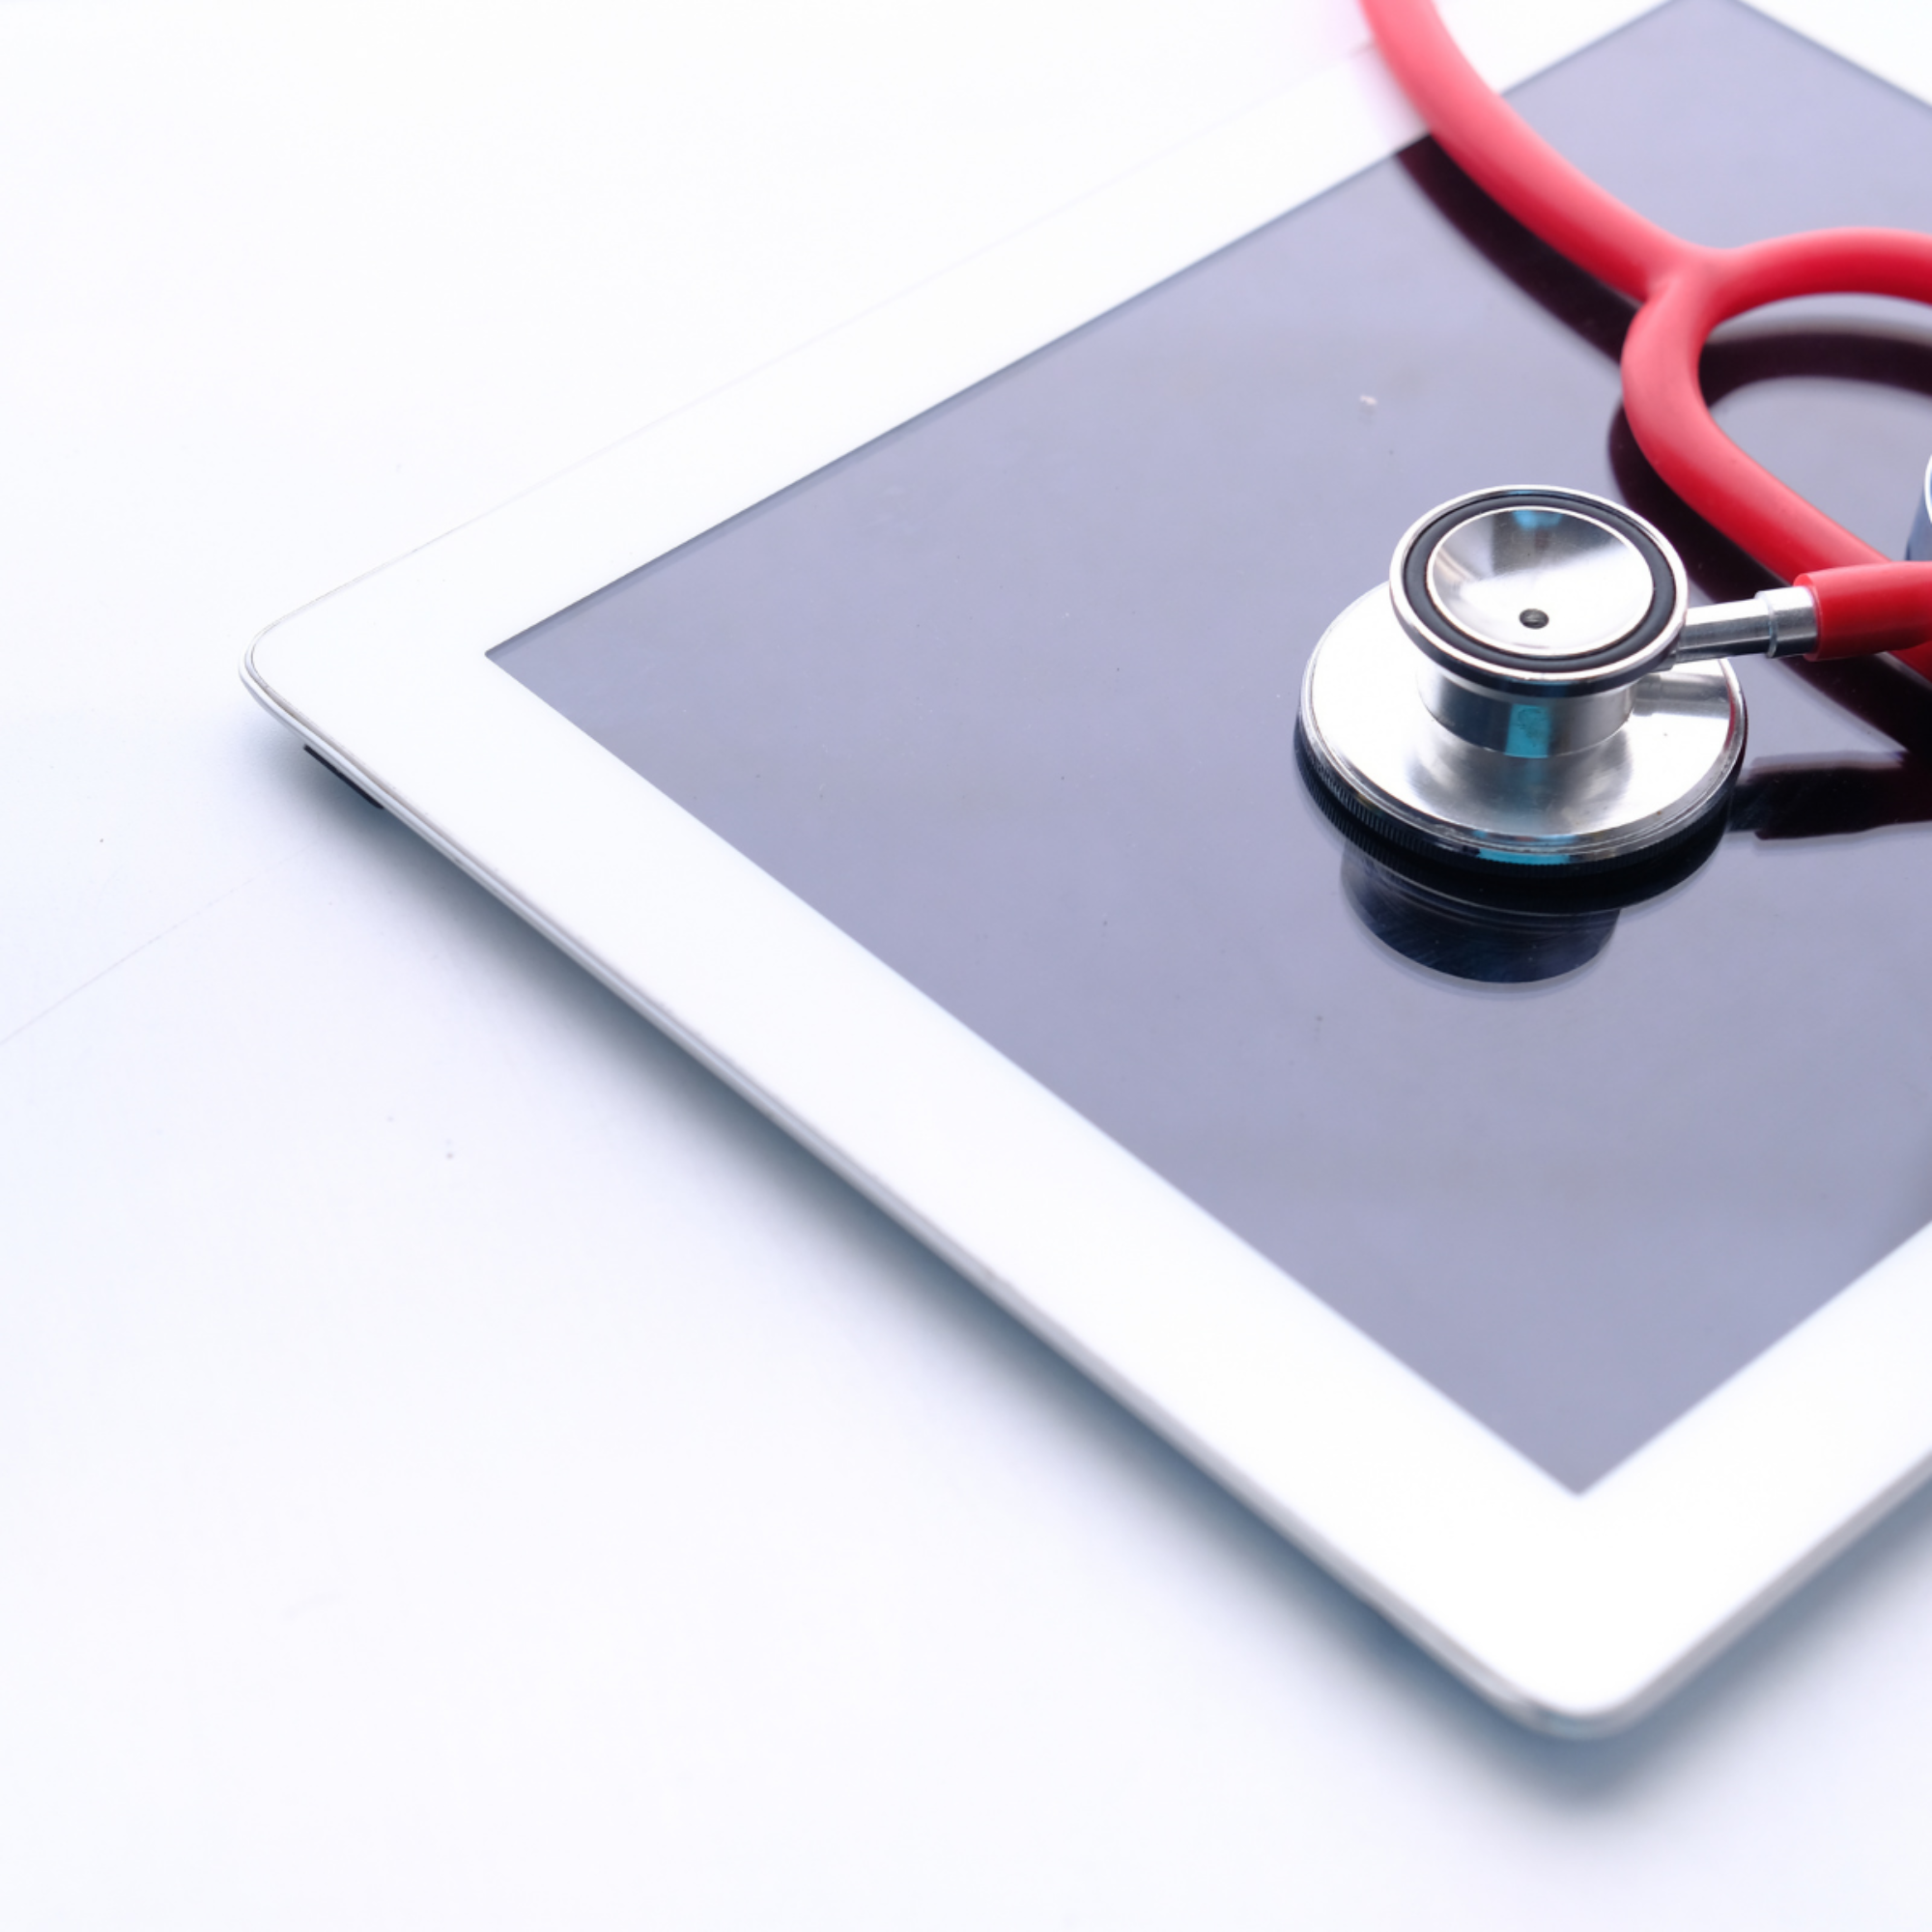 Digital communication for your healthcare professionals and patients